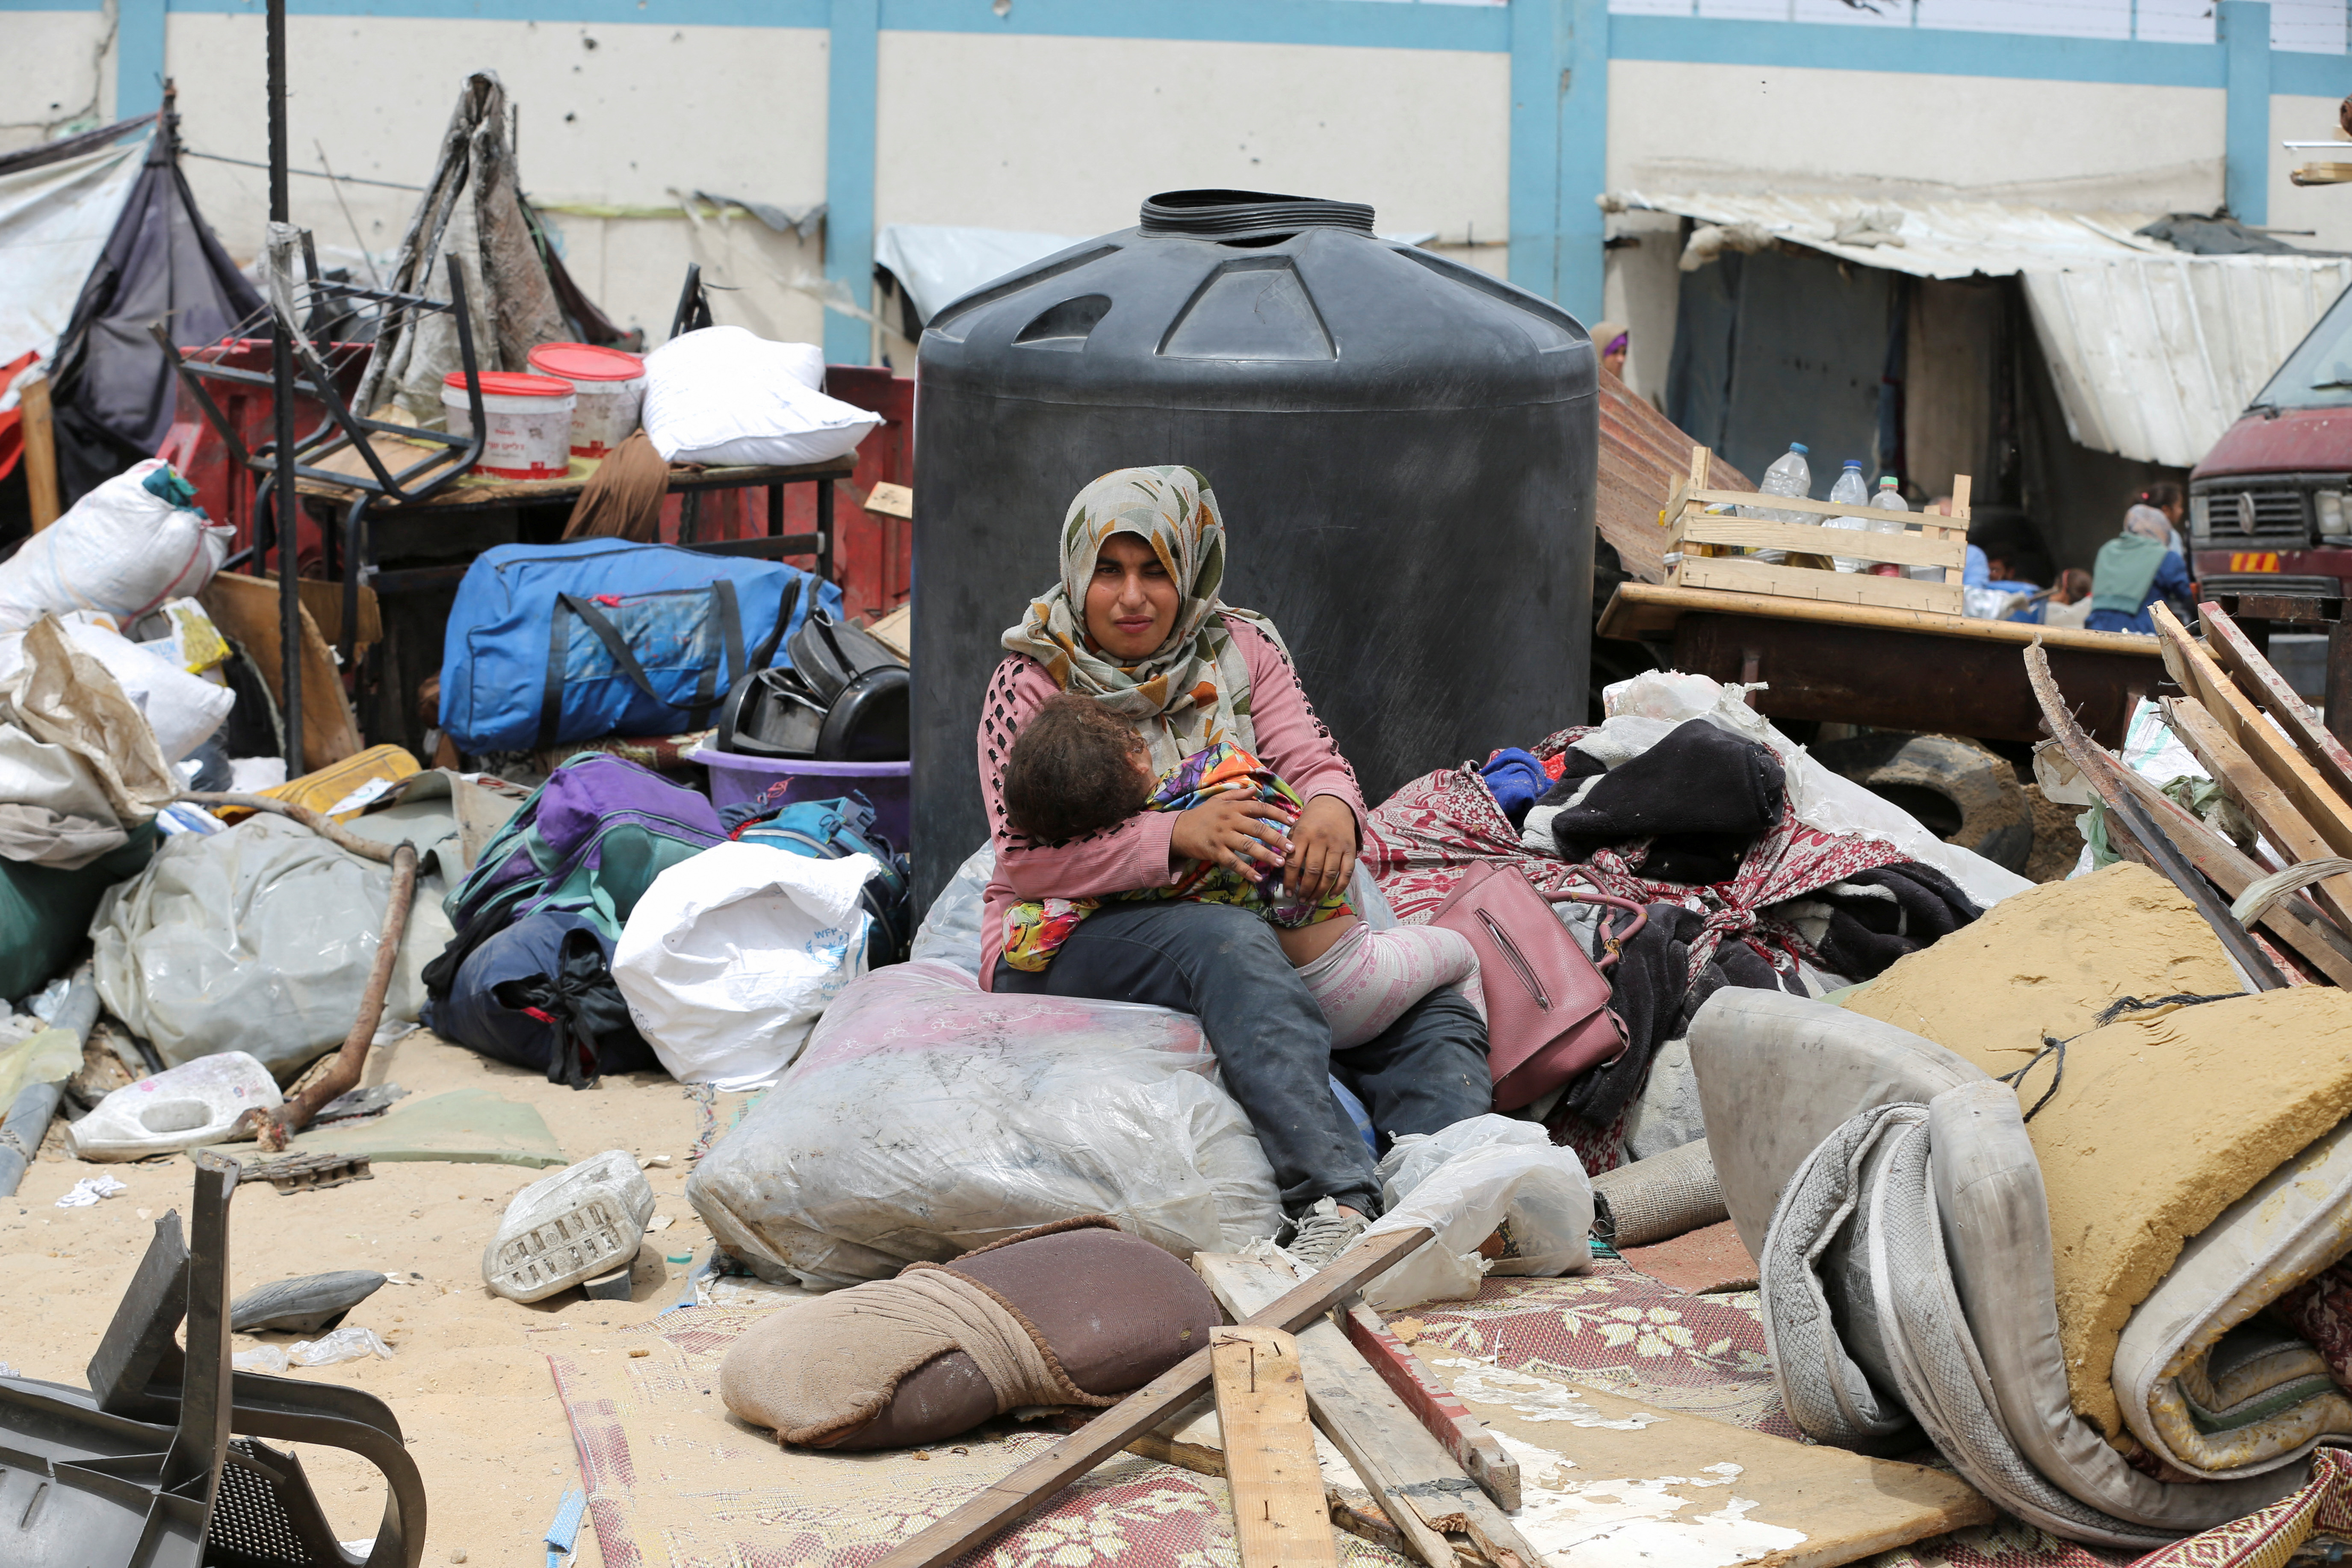 Palestinians travel on foot along with their belongings as they flee Rafah due to an Israeli military operation